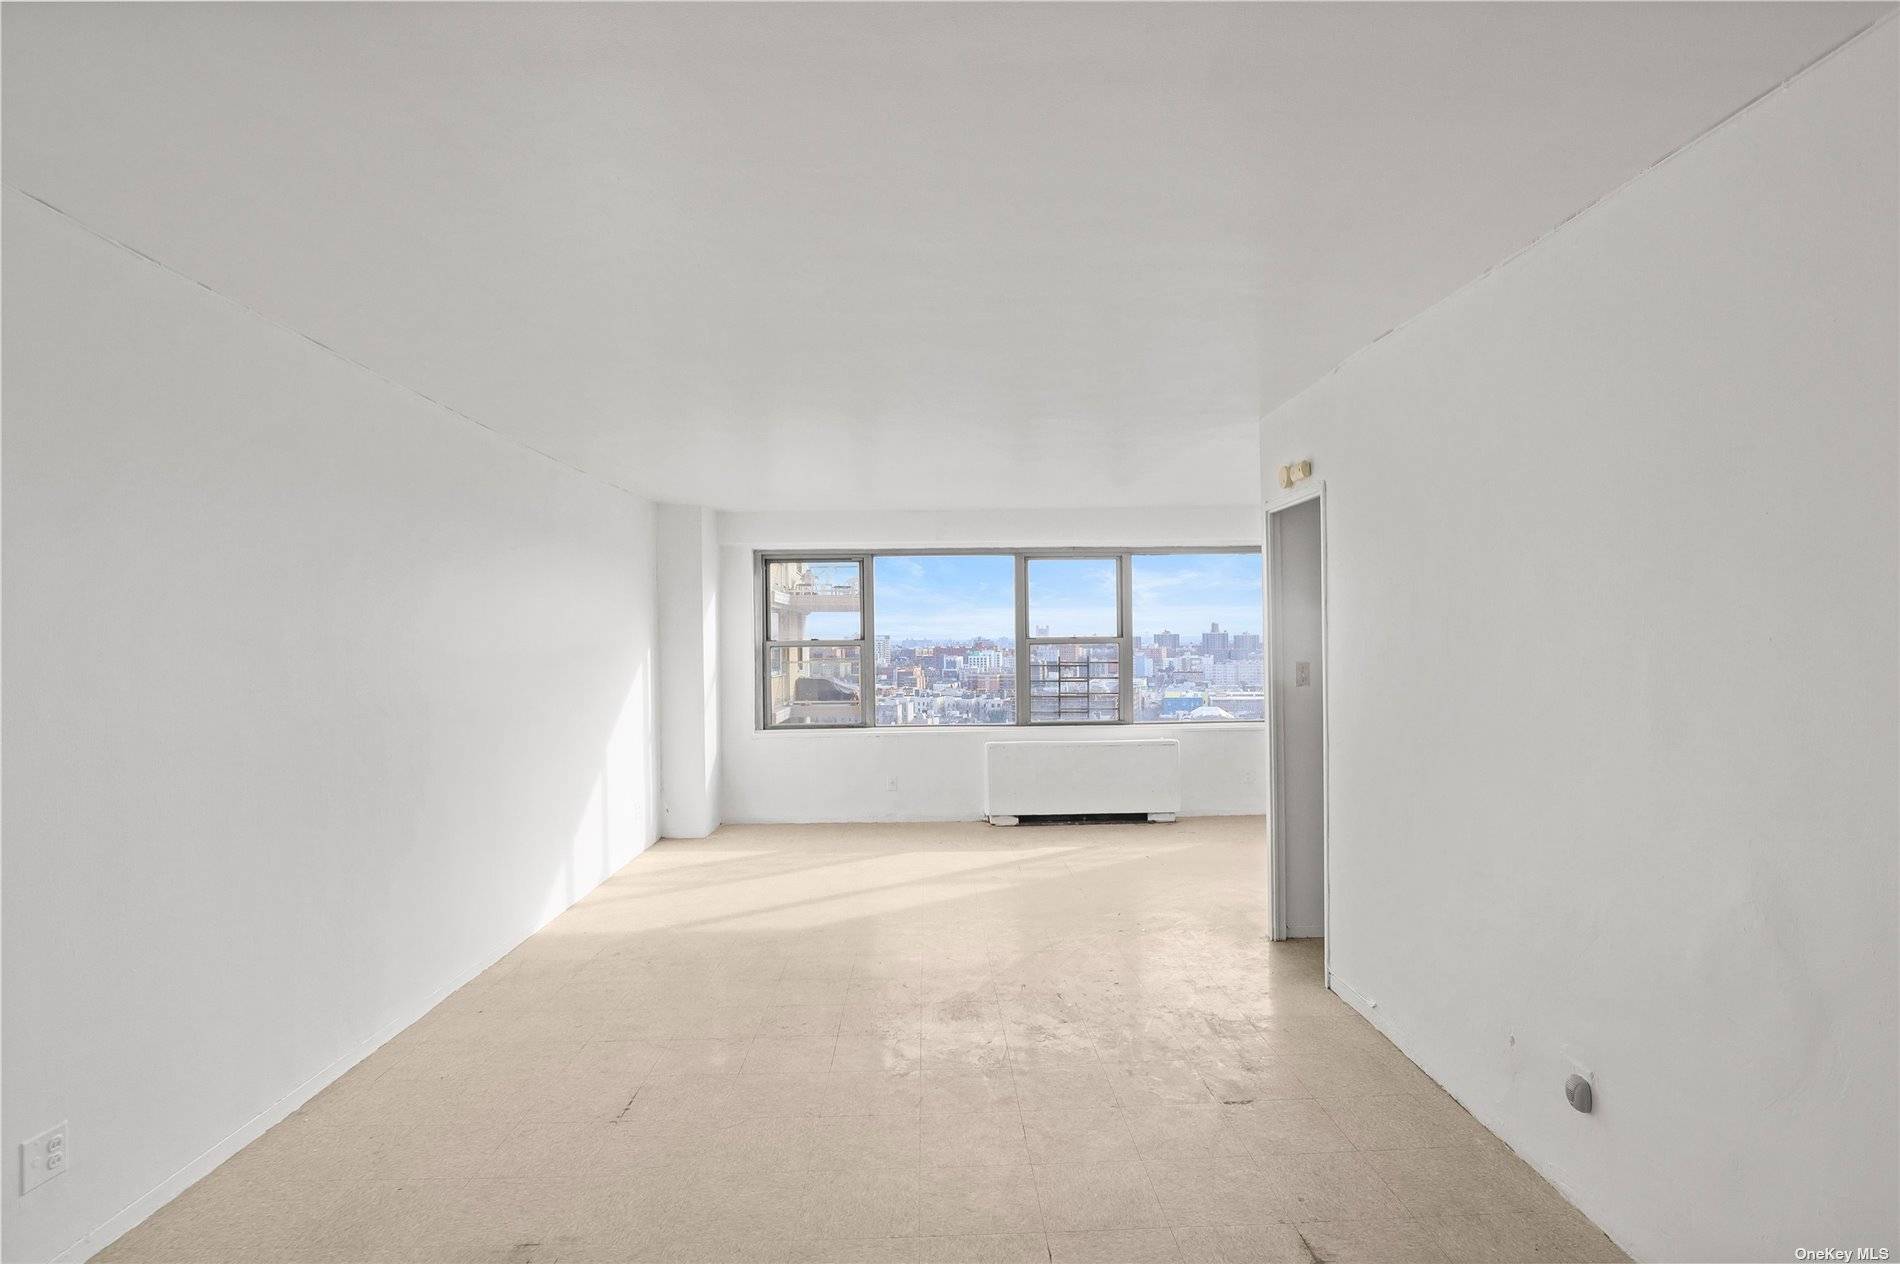 Studio Co Op Unit Ready To Make Your Own, Large Windows With Fantastic Views Upon Entry, Kitchen, Full Bathroom, Closet Space, The Executive Towers Full Service Luxury Coop located on ...